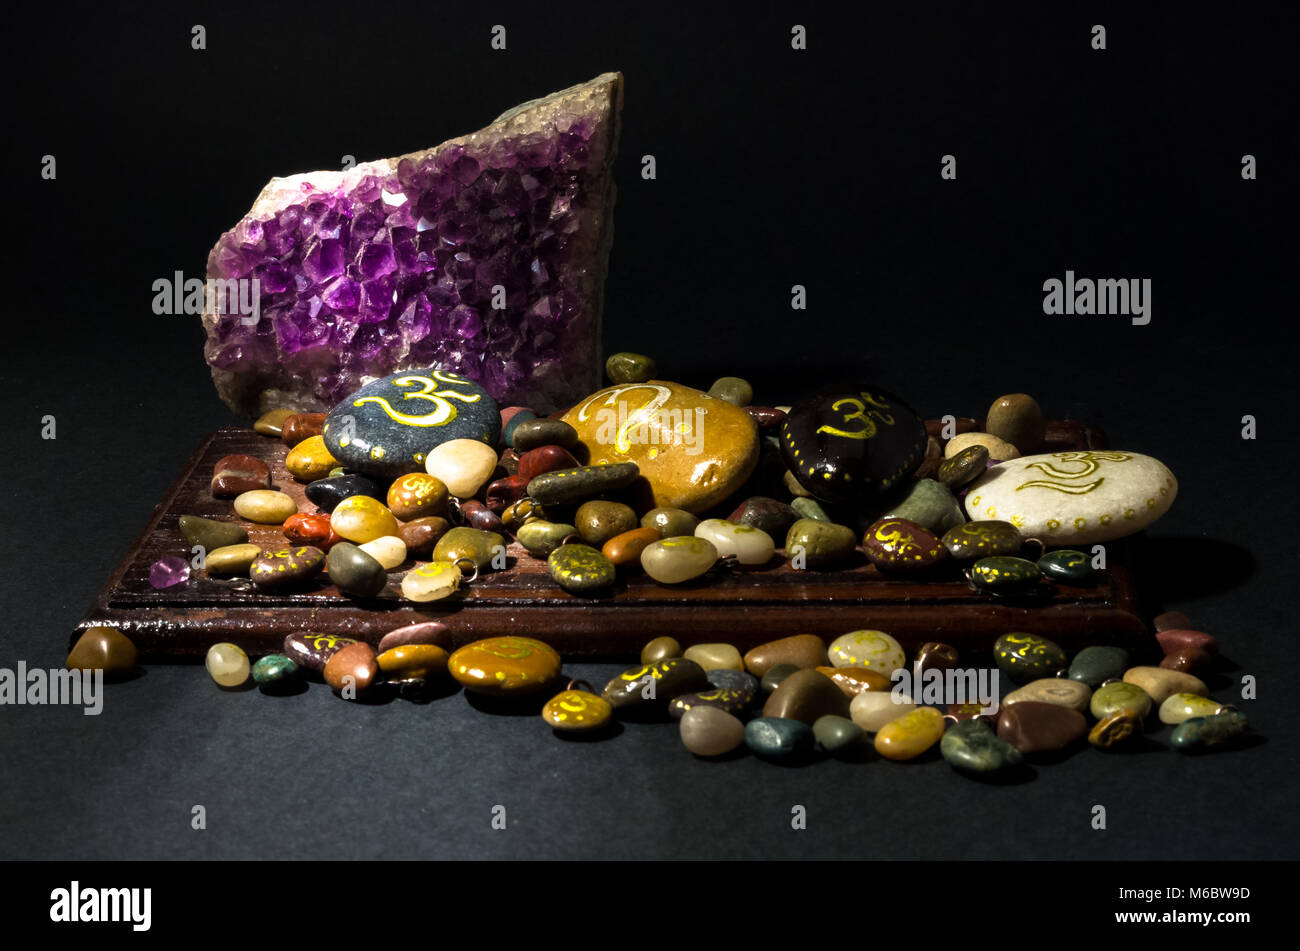 Amethyst crystal and colorful stones over a wooden board Stock Photo